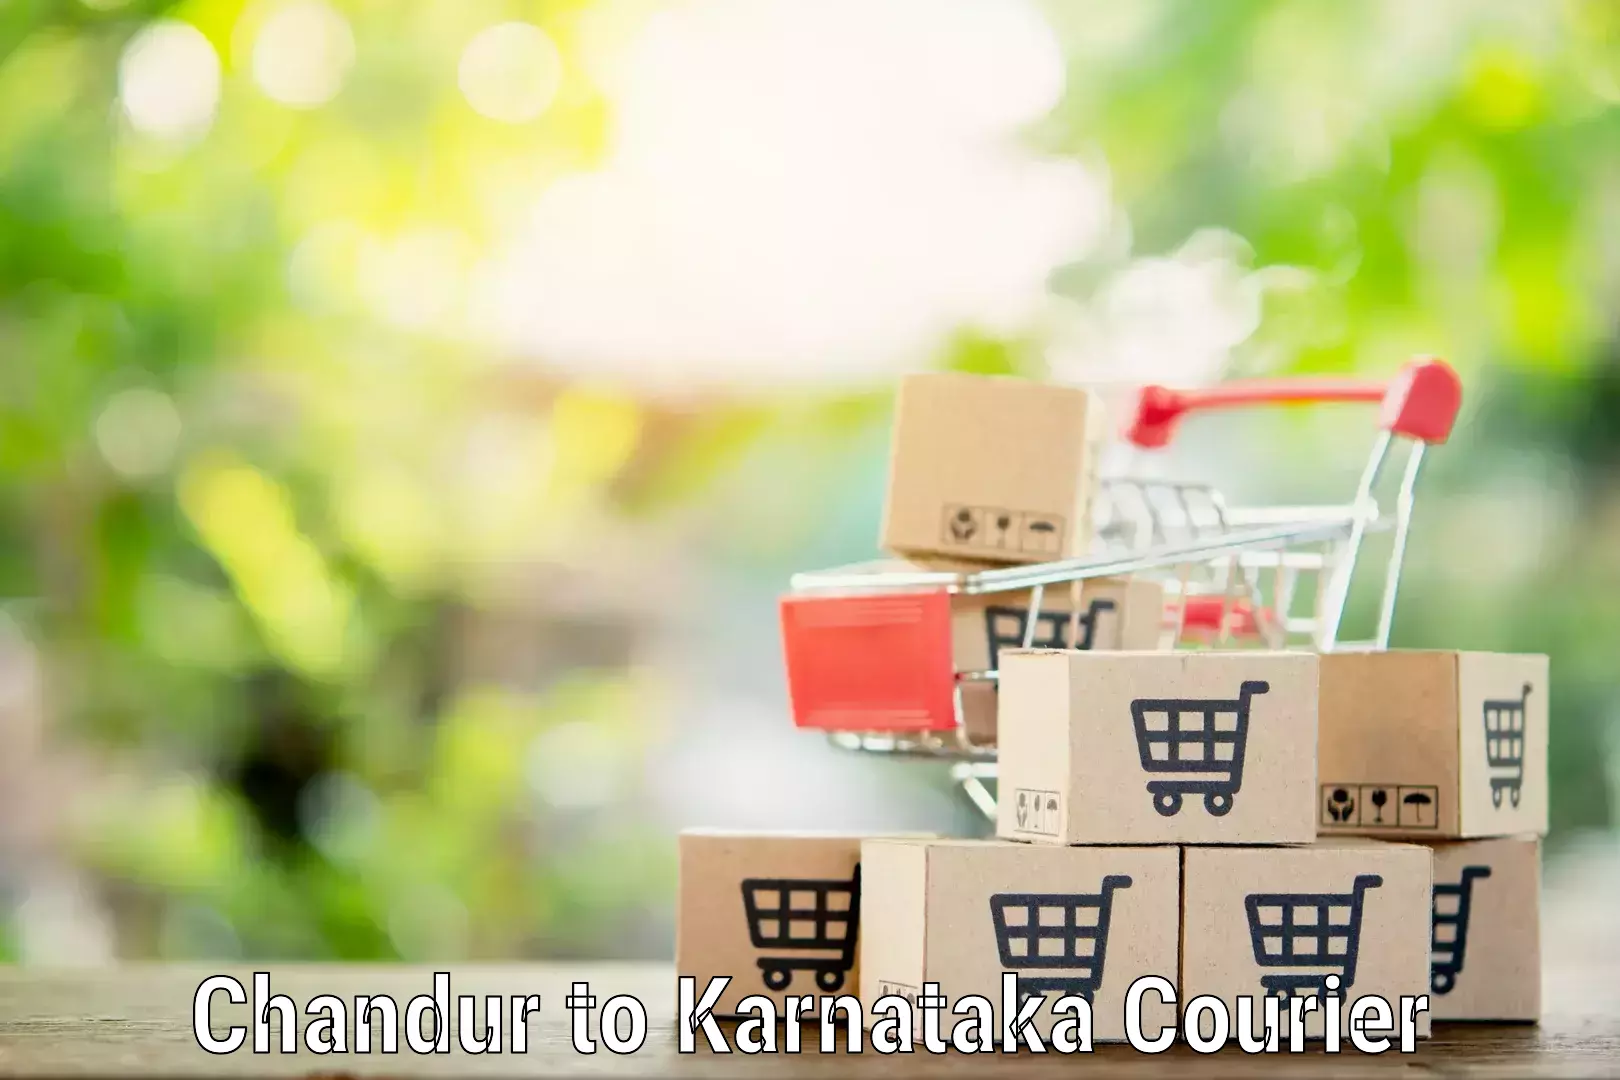 Quality relocation assistance in Chandur to Laxmeshwar